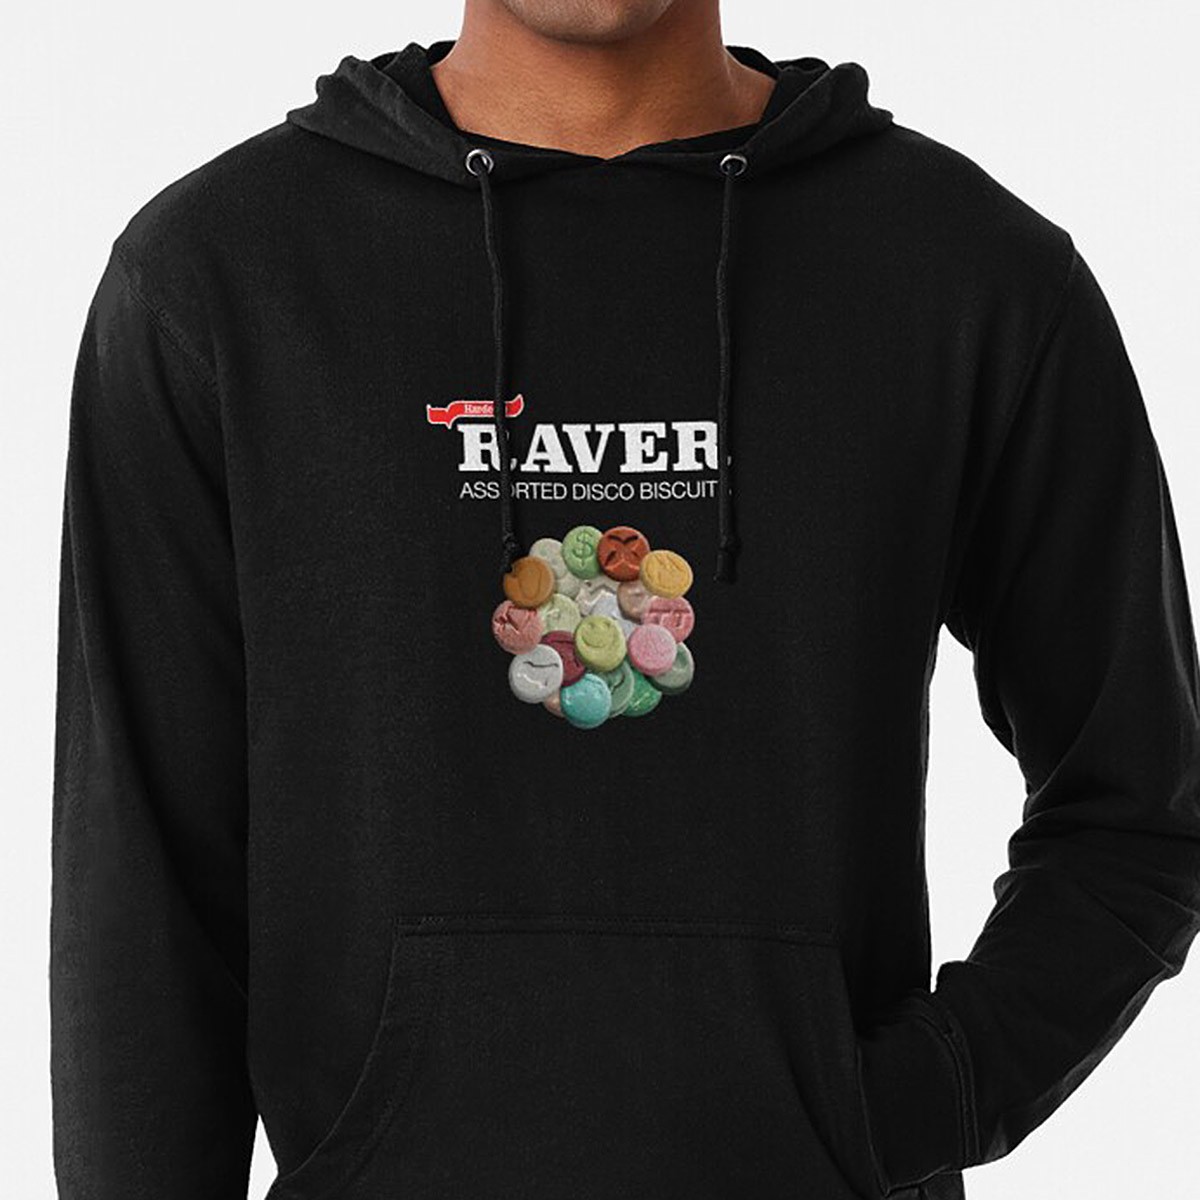 Hardcore Raver - Assorted Disco Biscuits Lightweight Hoodie by NTK Apparel